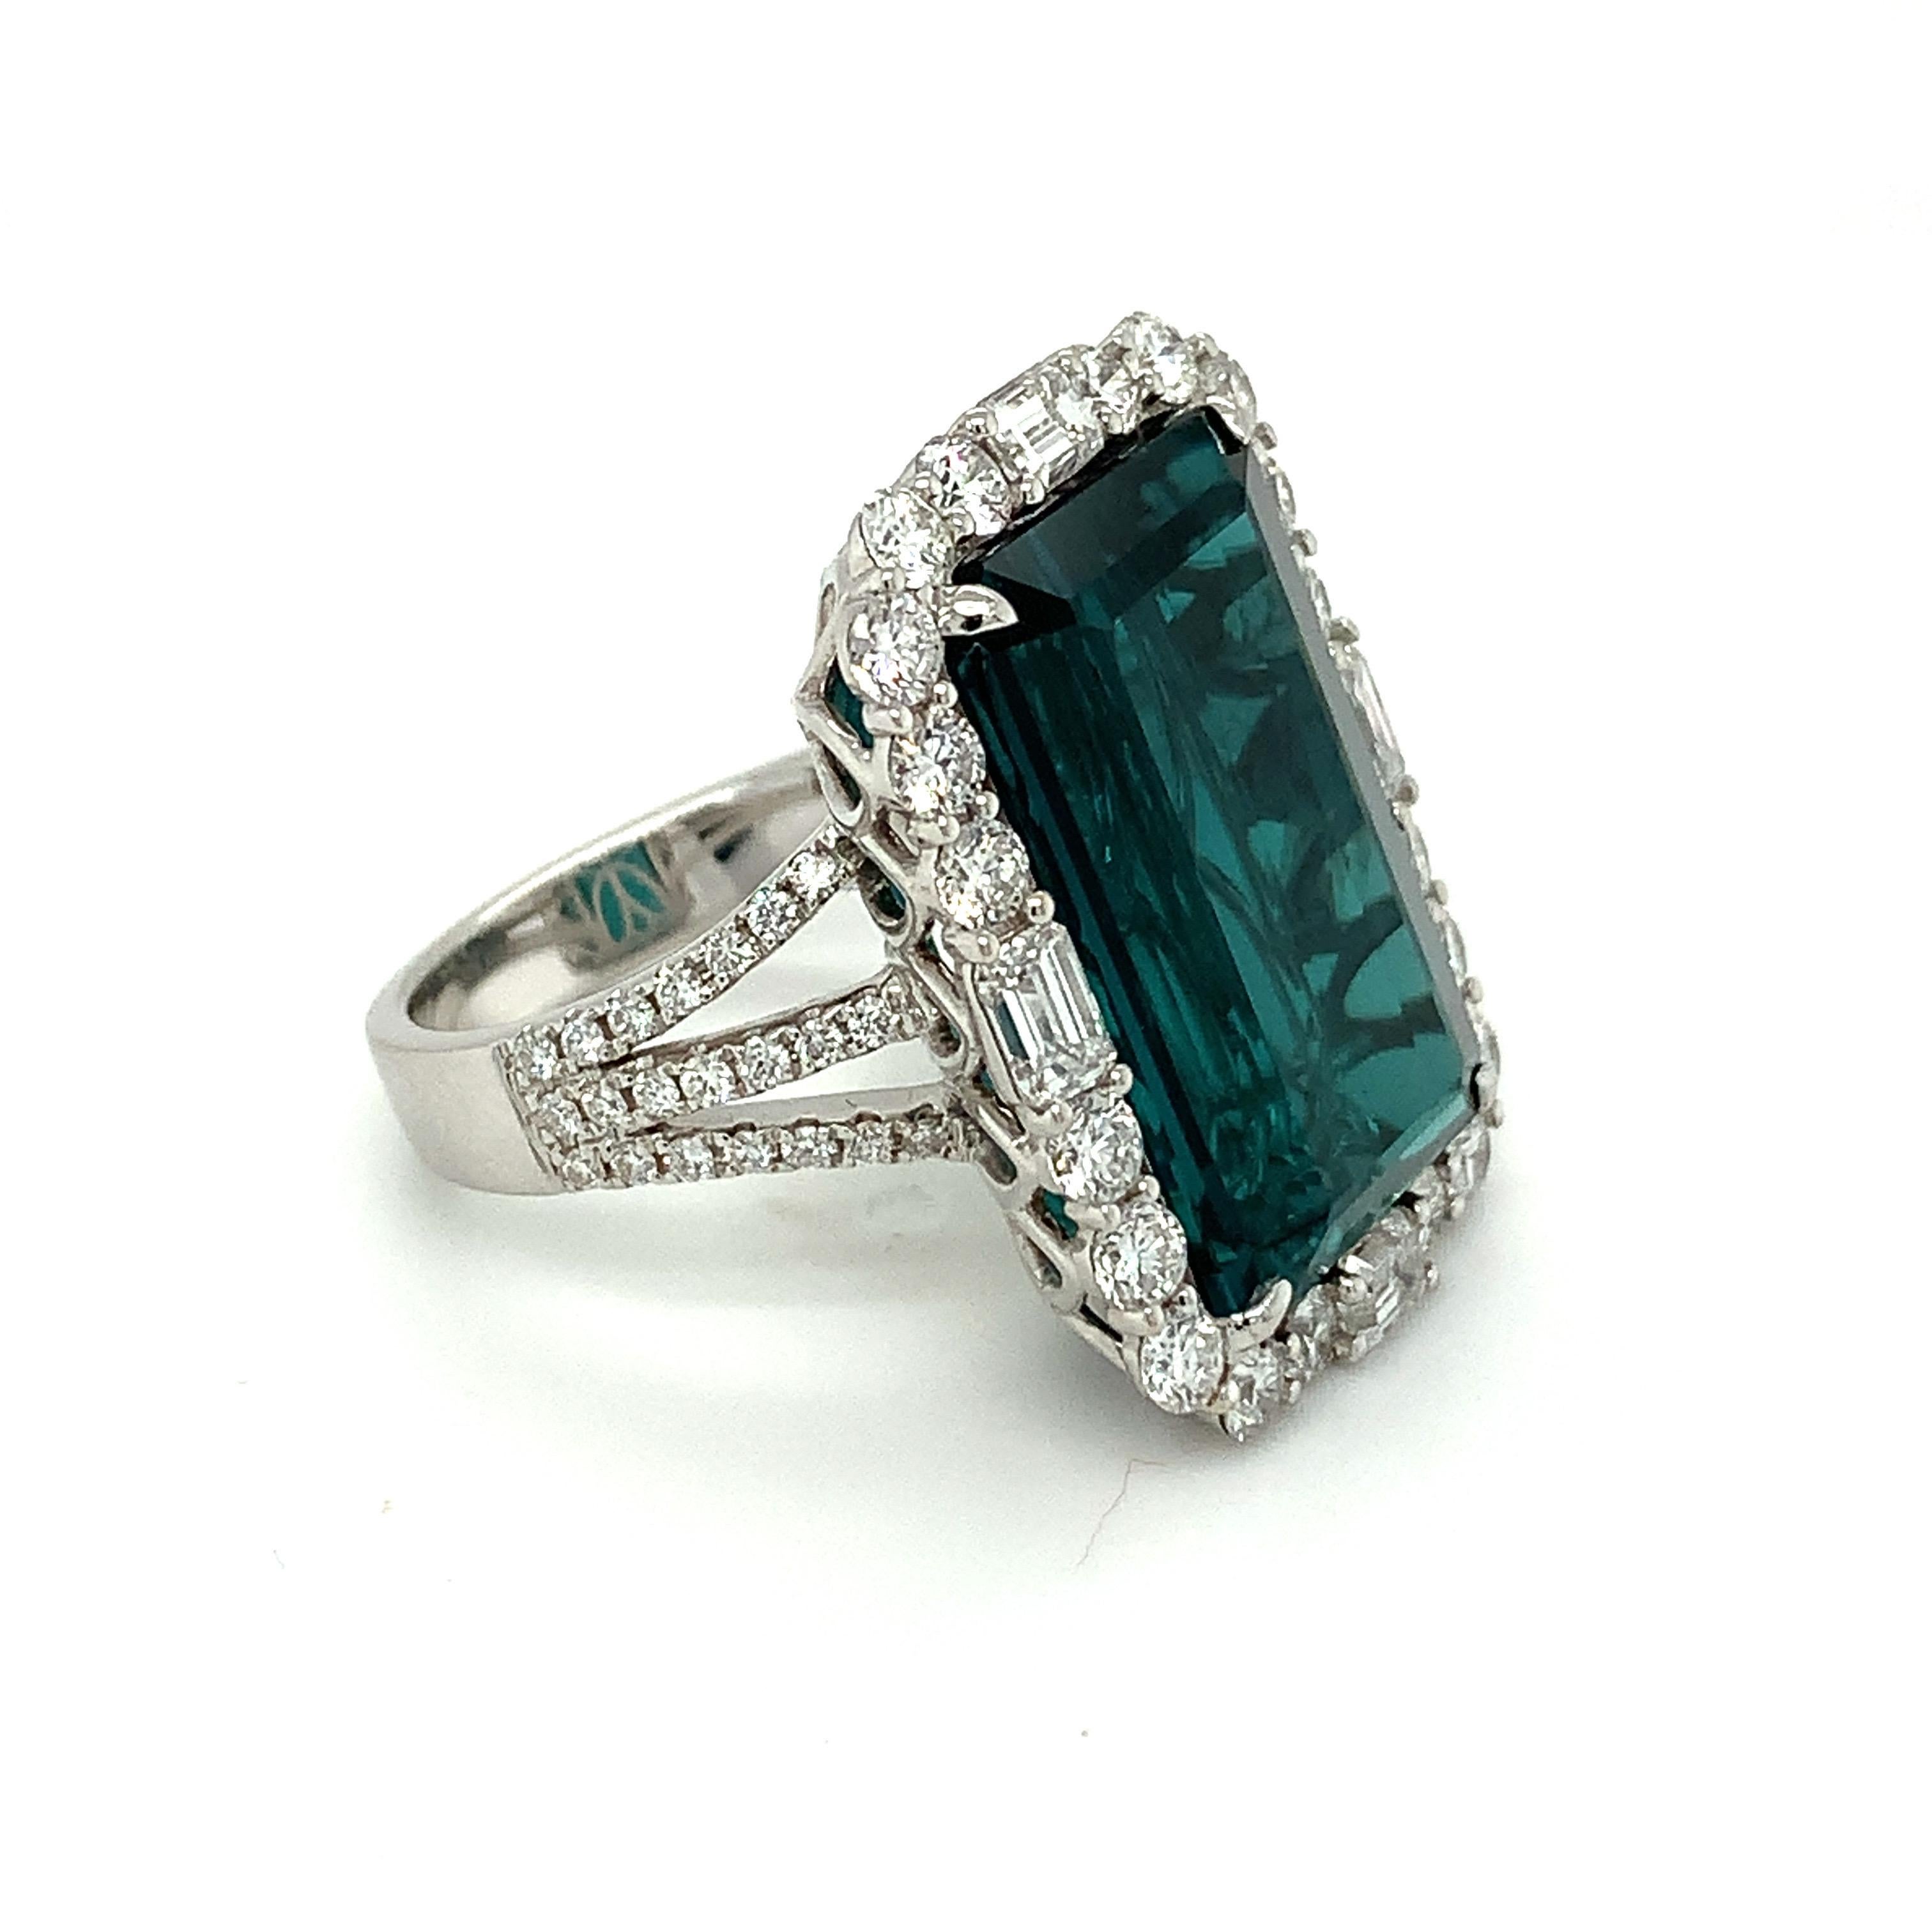 21.33 Carat Indicolite Tourmaline Diamond White Gold Cocktail Ring In New Condition For Sale In Trumbull, CT